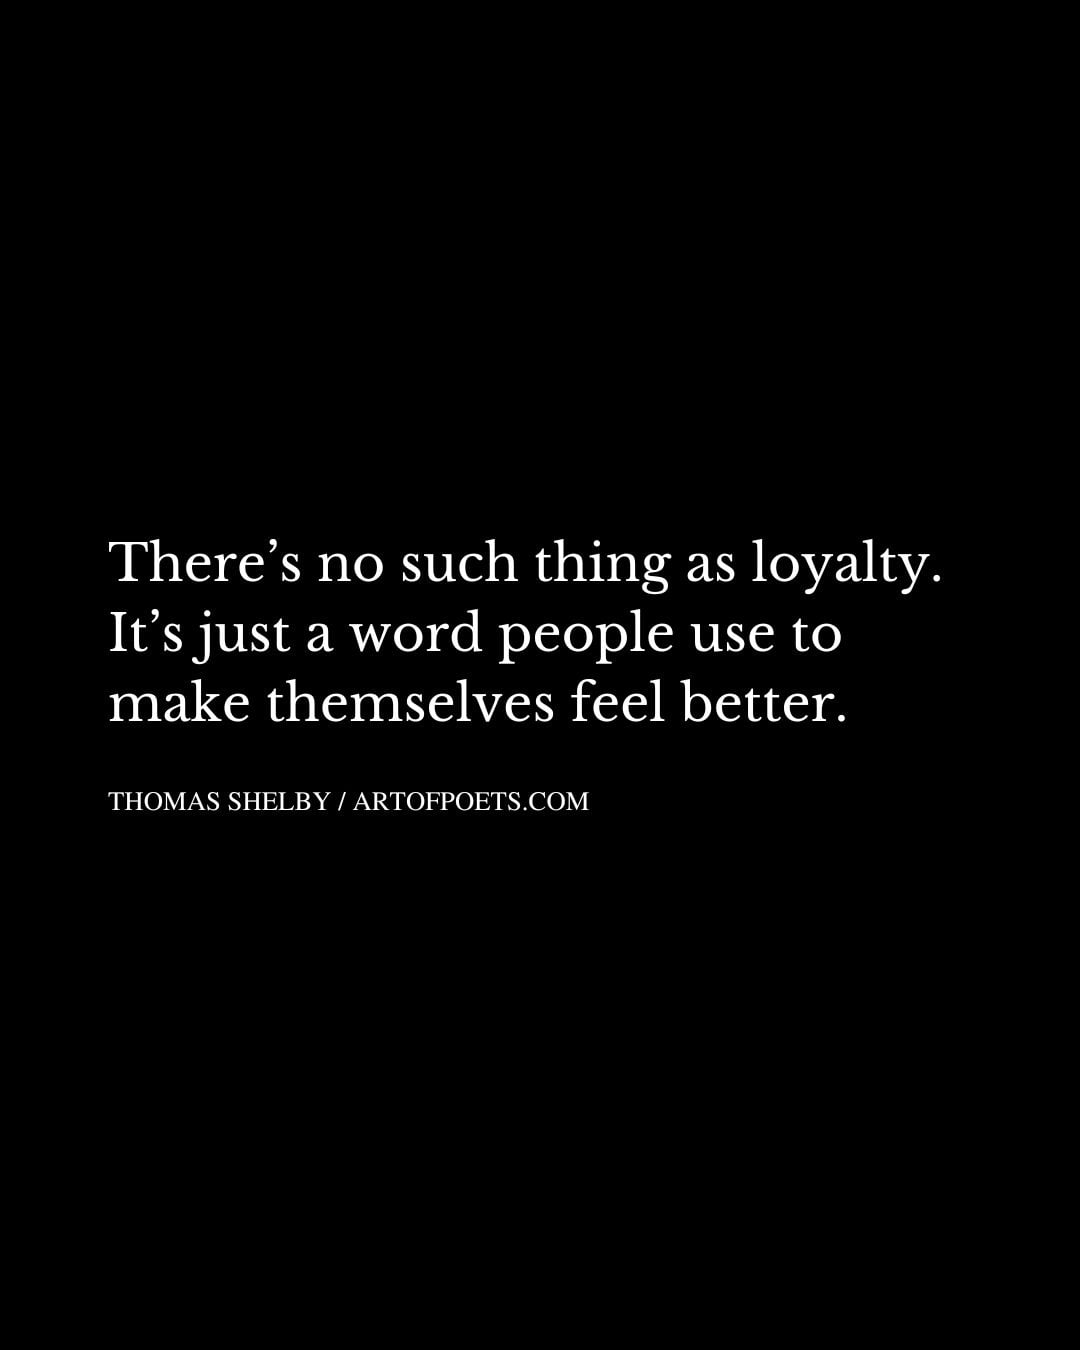 Theres no such thing as loyalty. Its just a word people use to make themselves feel better